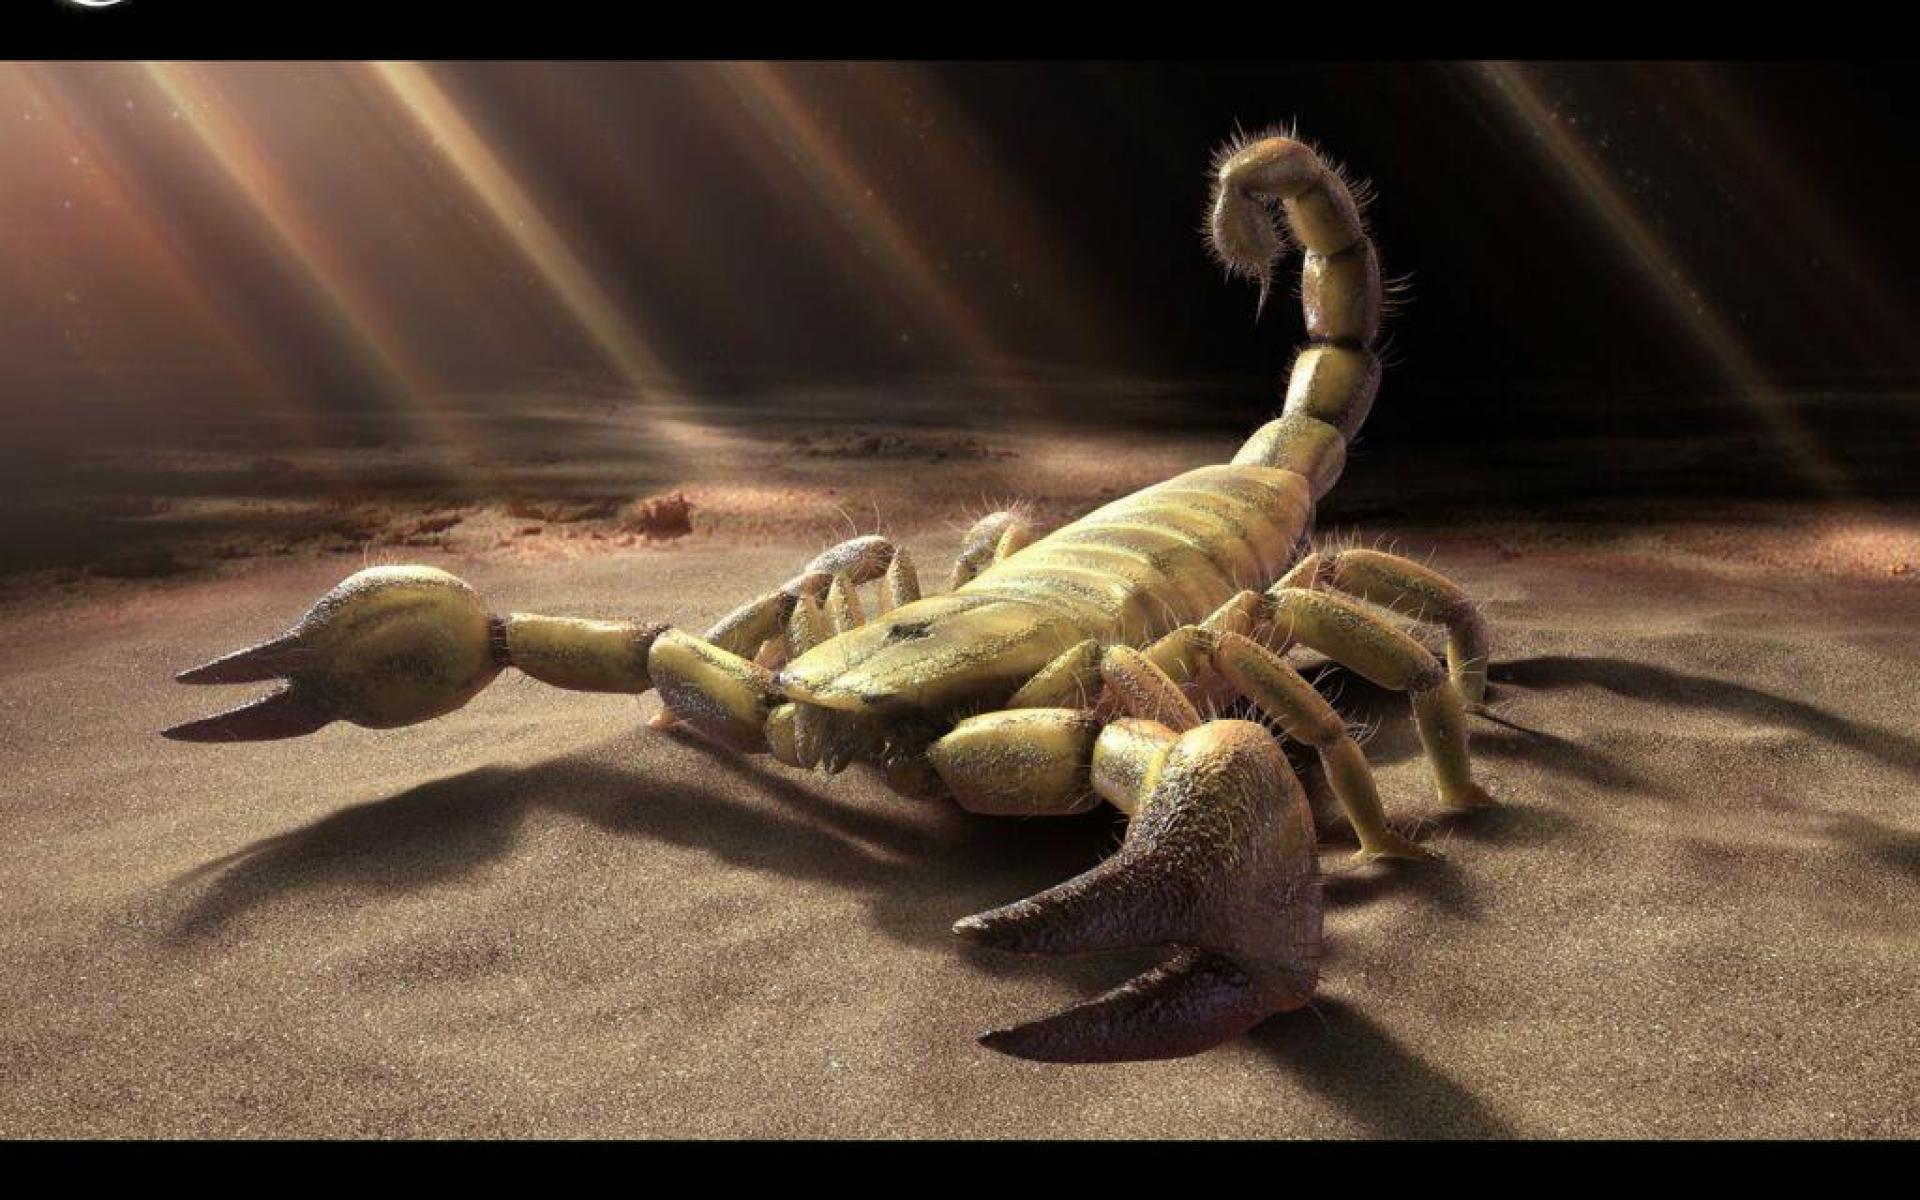 Scorpion HD Wallpapers Scorpion Images Free Cool Backgrounds